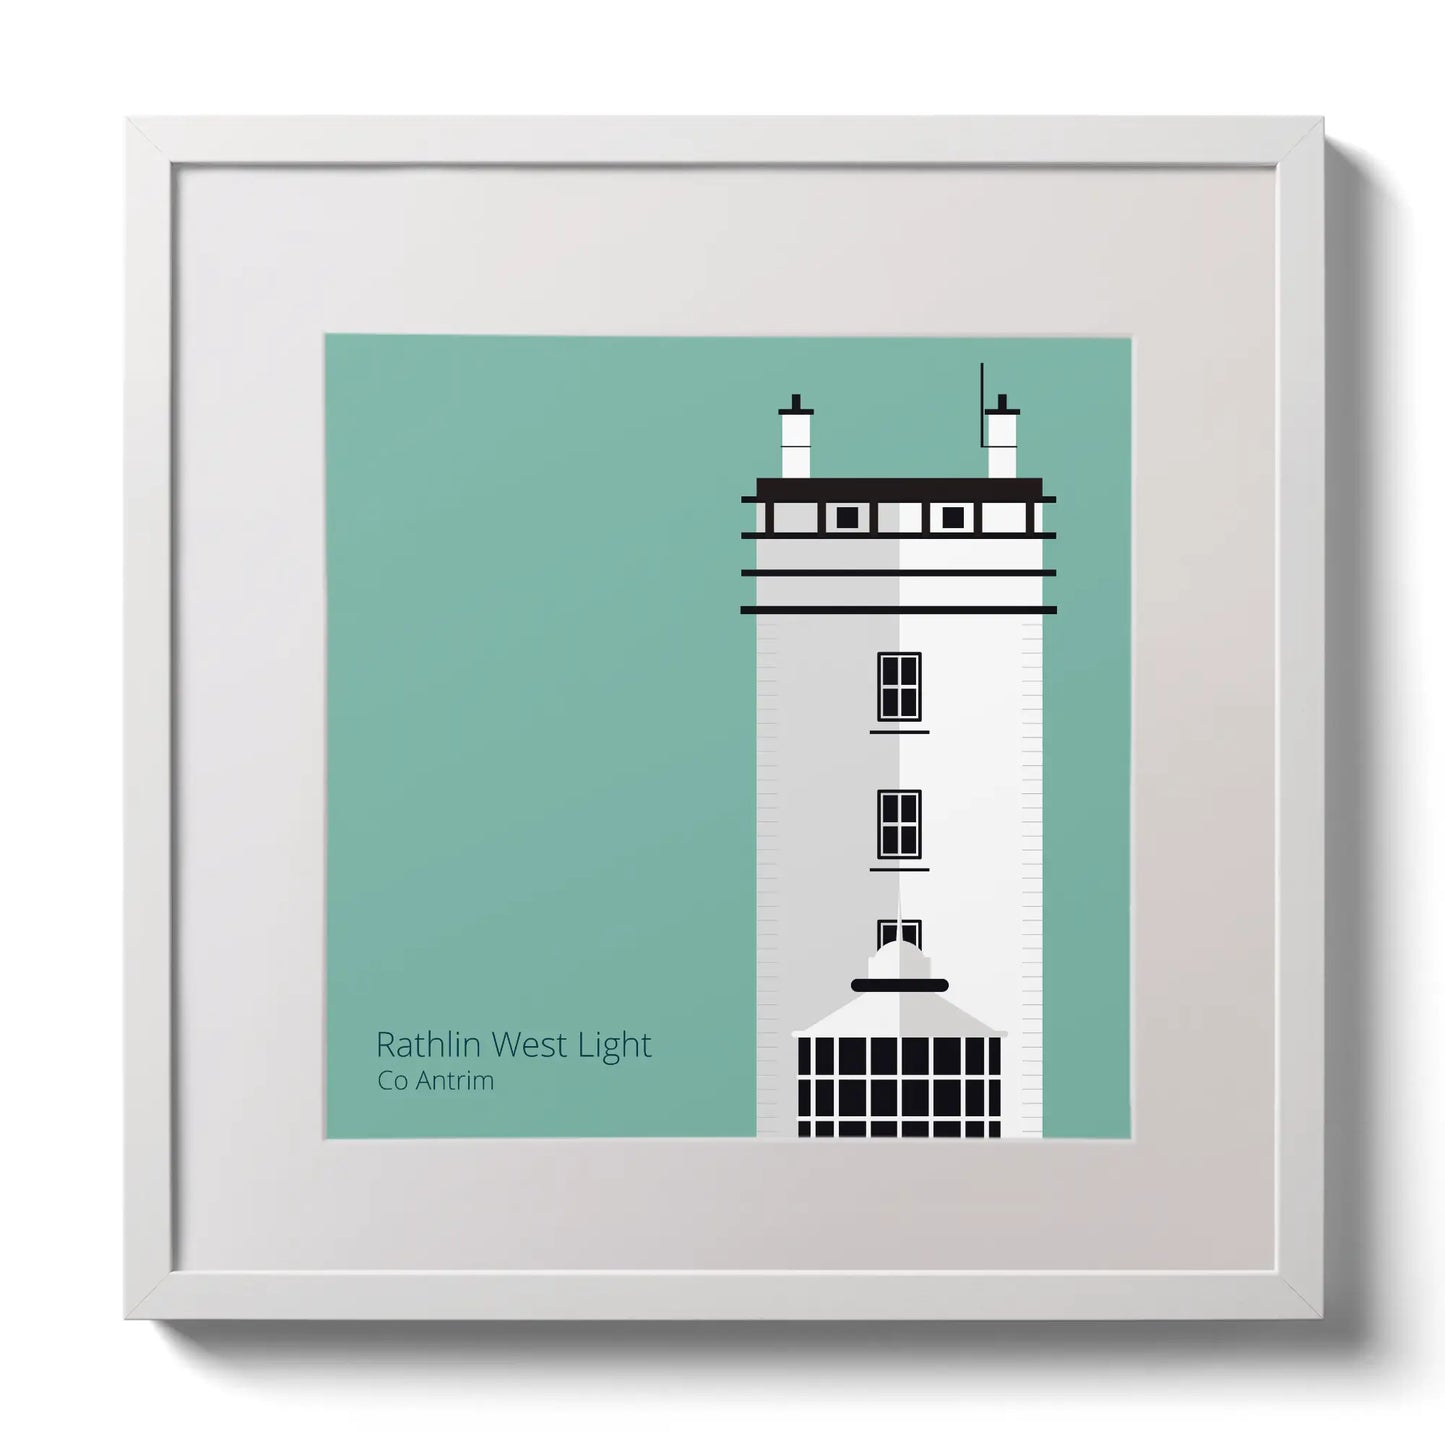 Illustration of Rathlin West lighthouse on an ocean green background,  in a white square frame measuring 30x30cm.